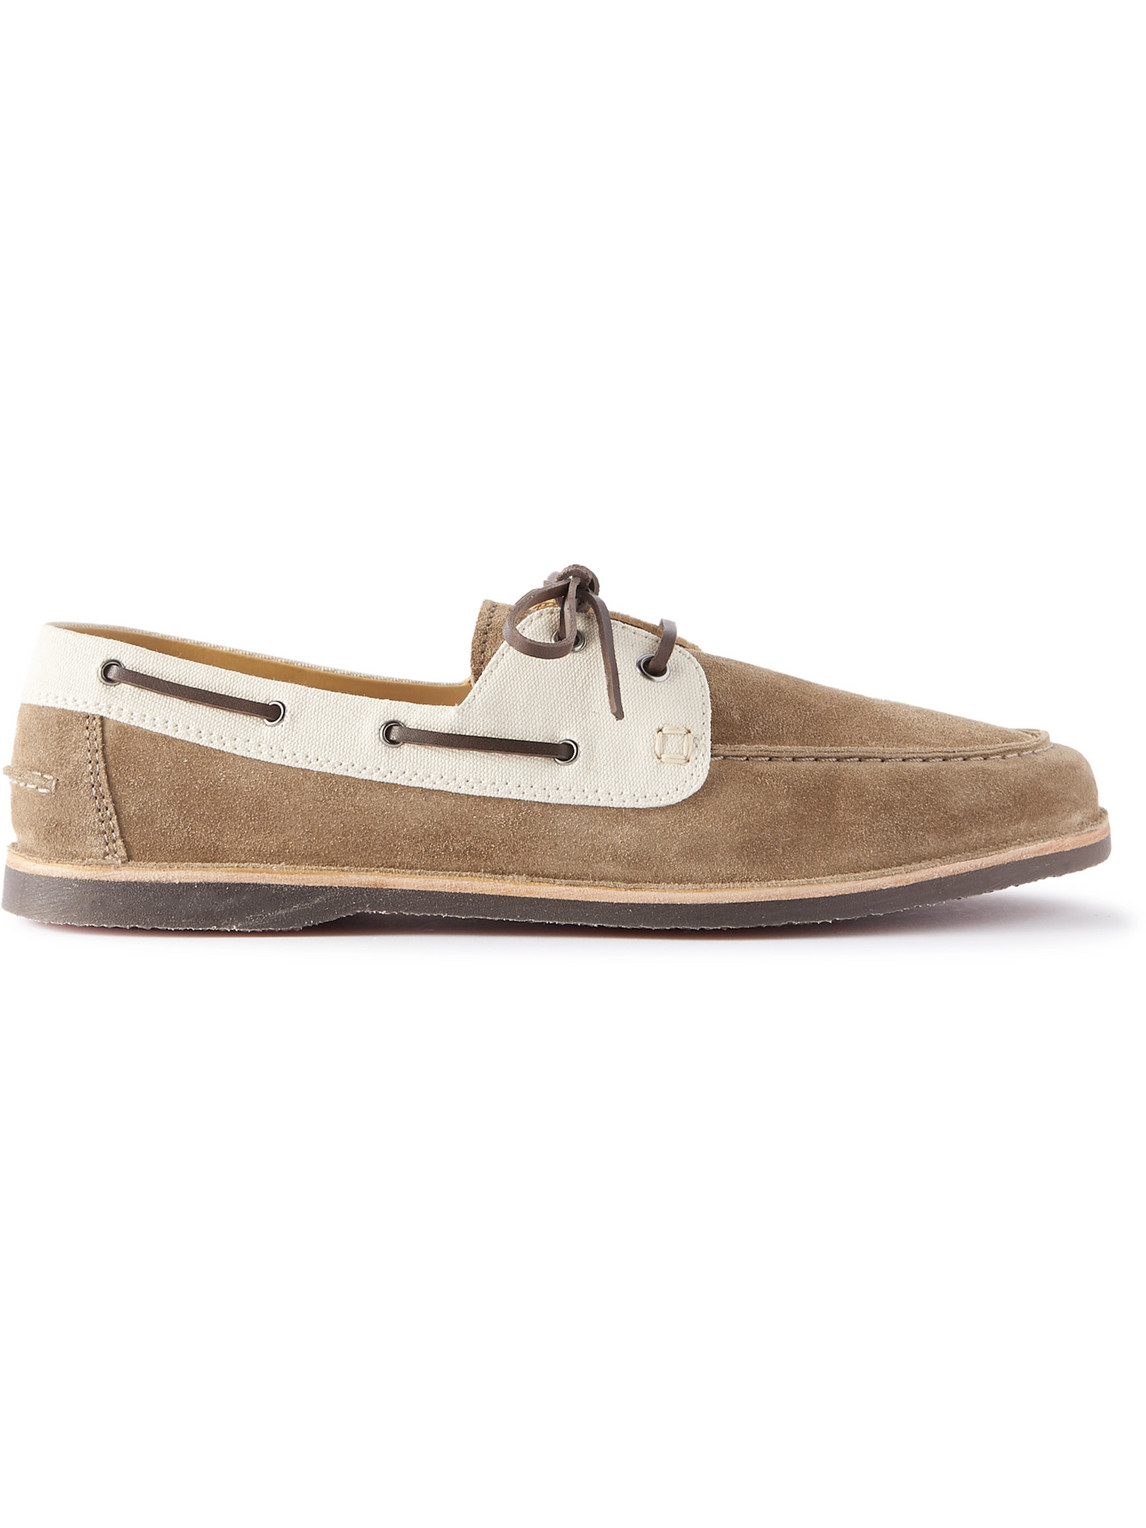 Canvas-Trimmed Suede Boat Shoes